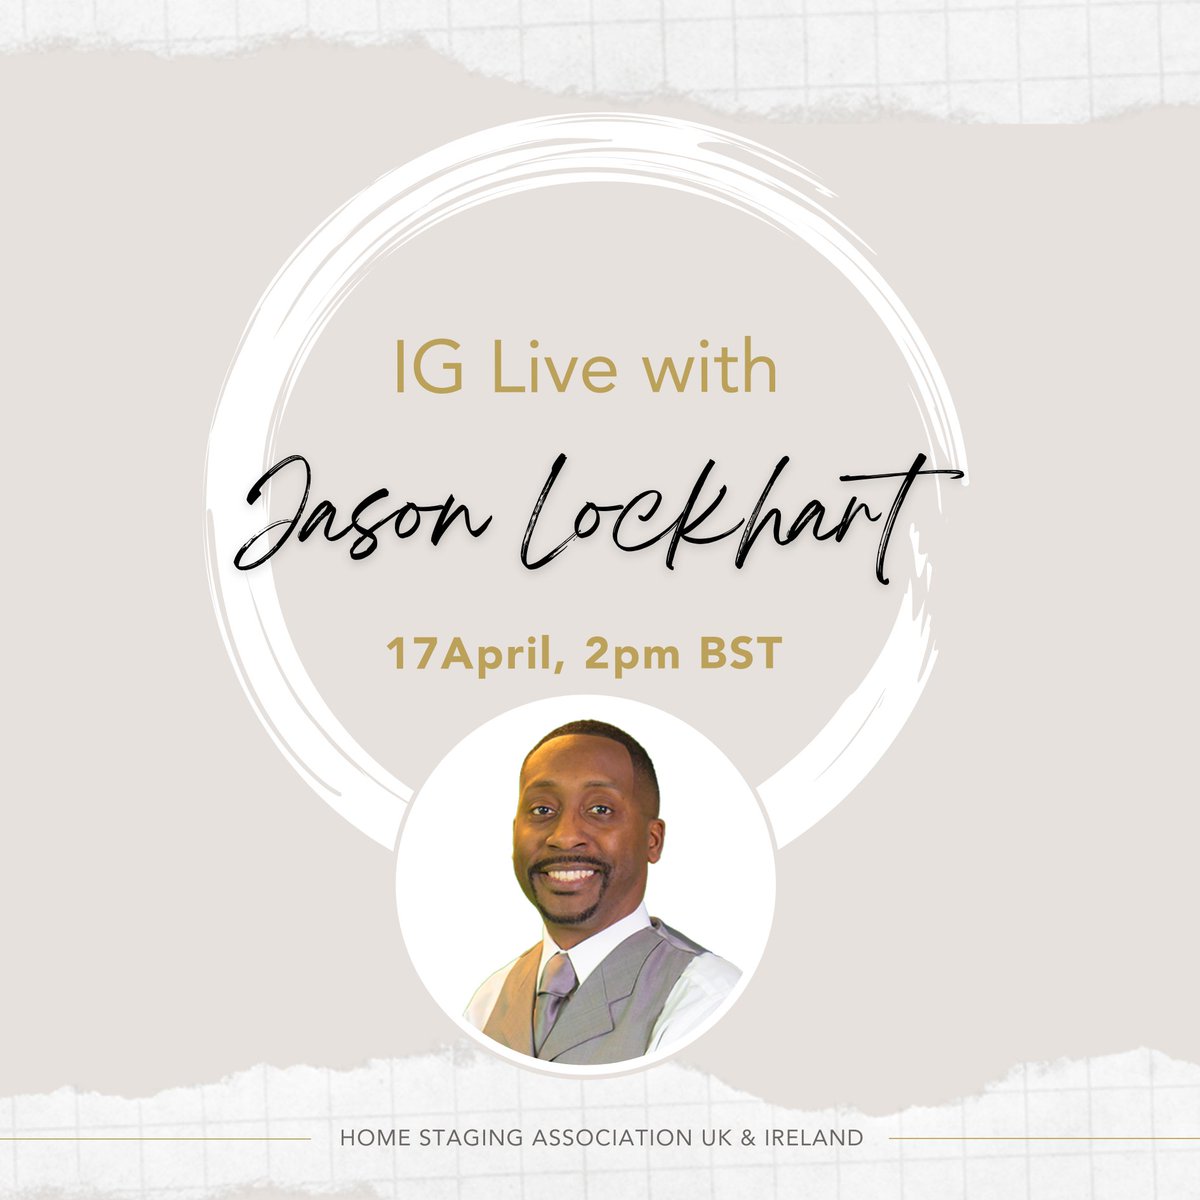 Our first IG live this year is happening next week with Jason Lockhart of @kabms_com. Stay tuned as we talk about marketing strategies for home stagers in 2024. See you on 17 April, 2PM BST! #hsalive #homestaging #marketingtips #realestateuk #propertymarketing